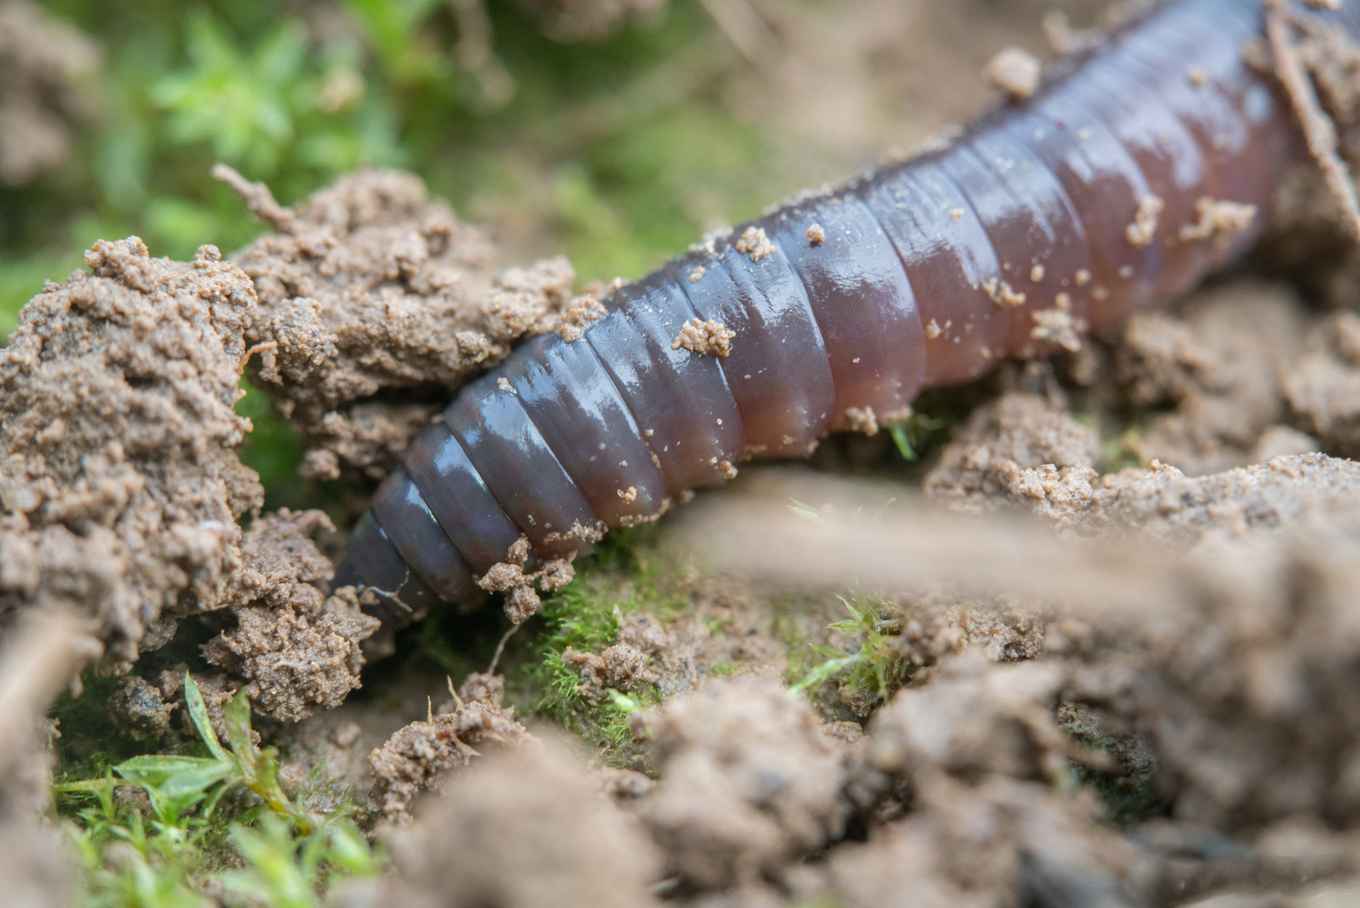 Earthworms are the architects of the soil. They mix the soil layers, form a network of burrows essential for soil water, air, and nutrient dynamics, and decompose dead material.